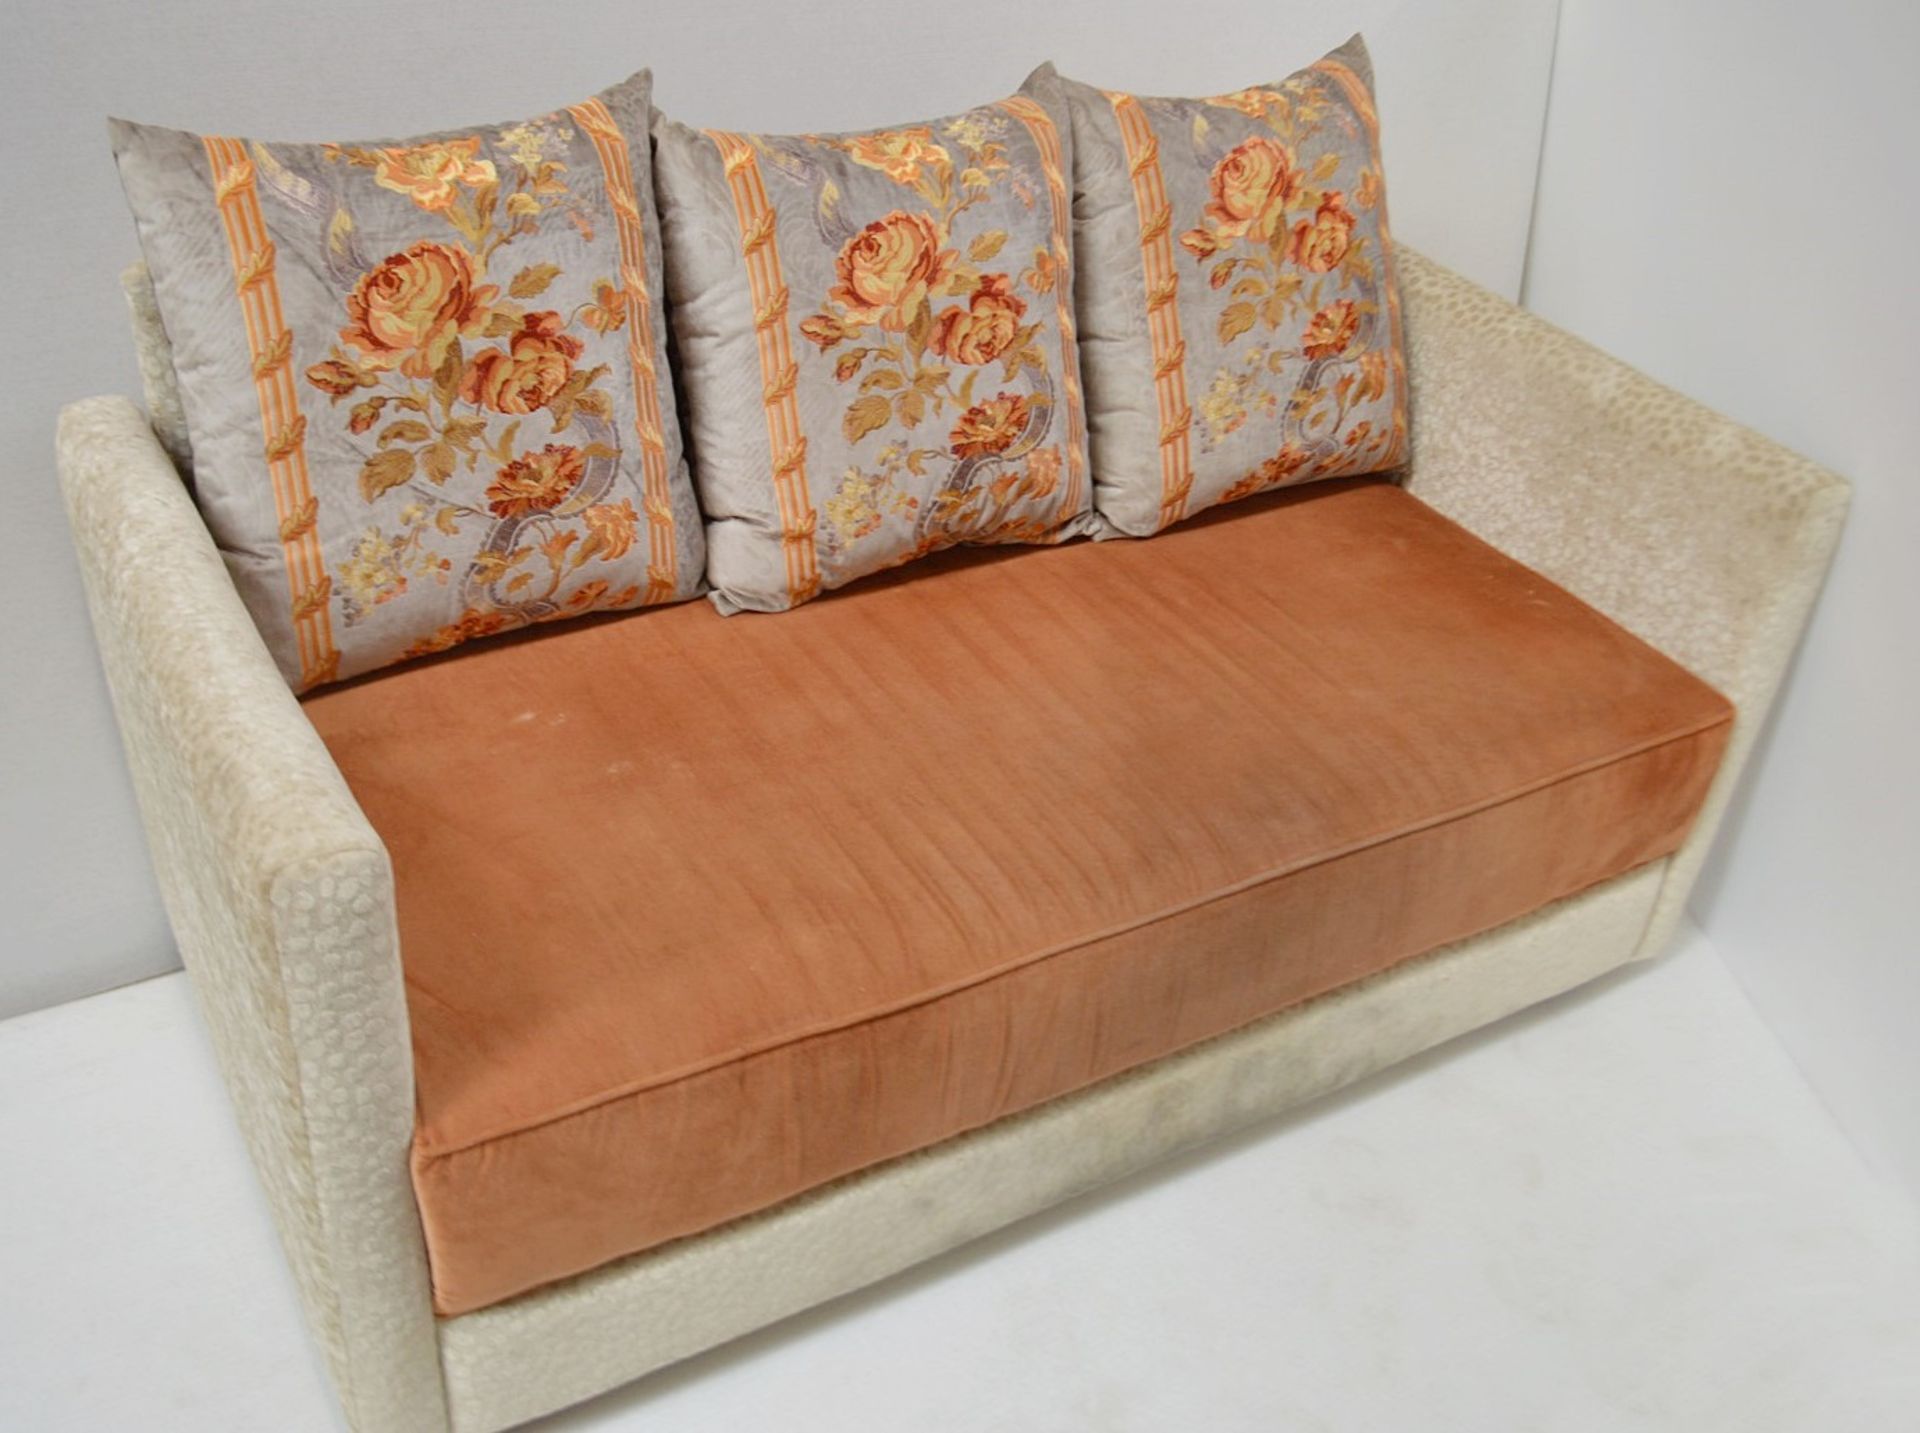 1 x Upholstered Sofa With A Selection Of Cushions - Dimensions: W181 x D77 x H70cm / Seat 39cm - Image 2 of 8